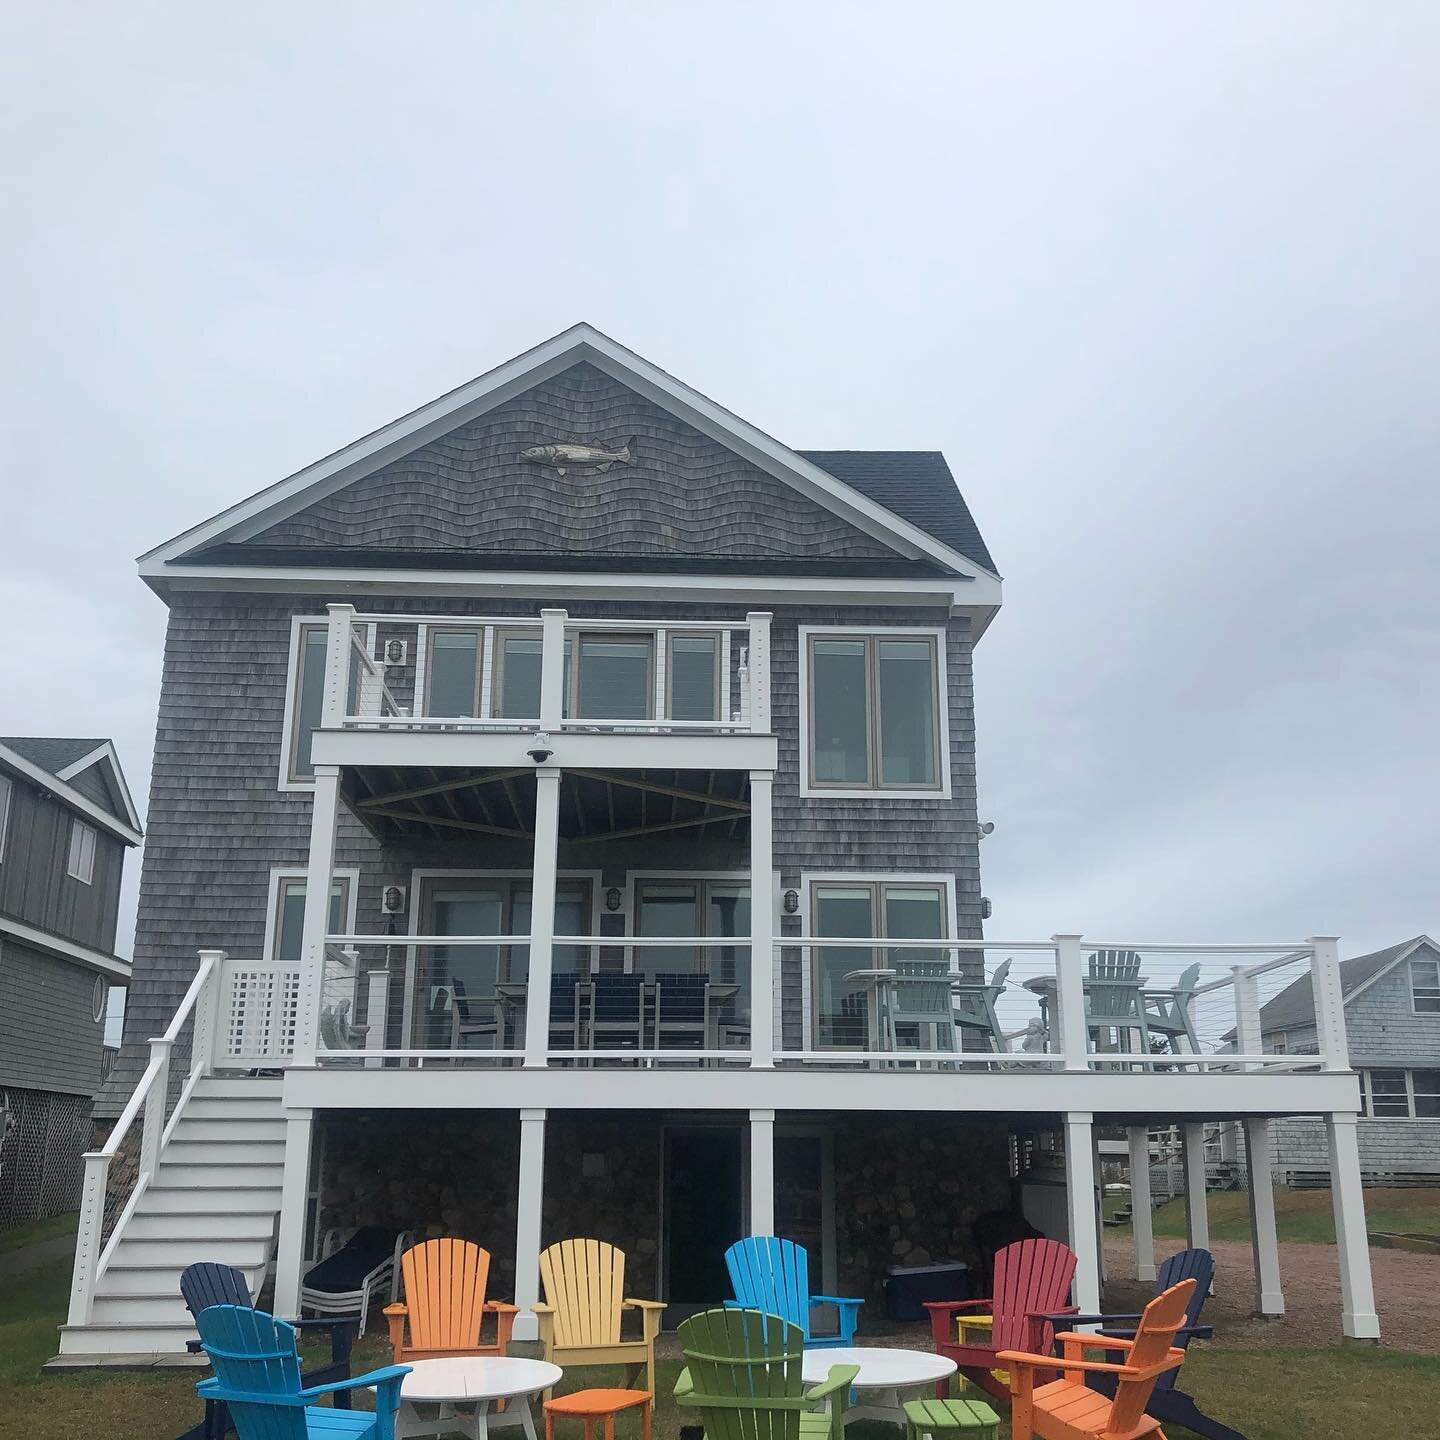 Took a visit today to check on a project completed this past Spring. The new deck has gotten a lot of use this summer! Check out our website for more photos 📷